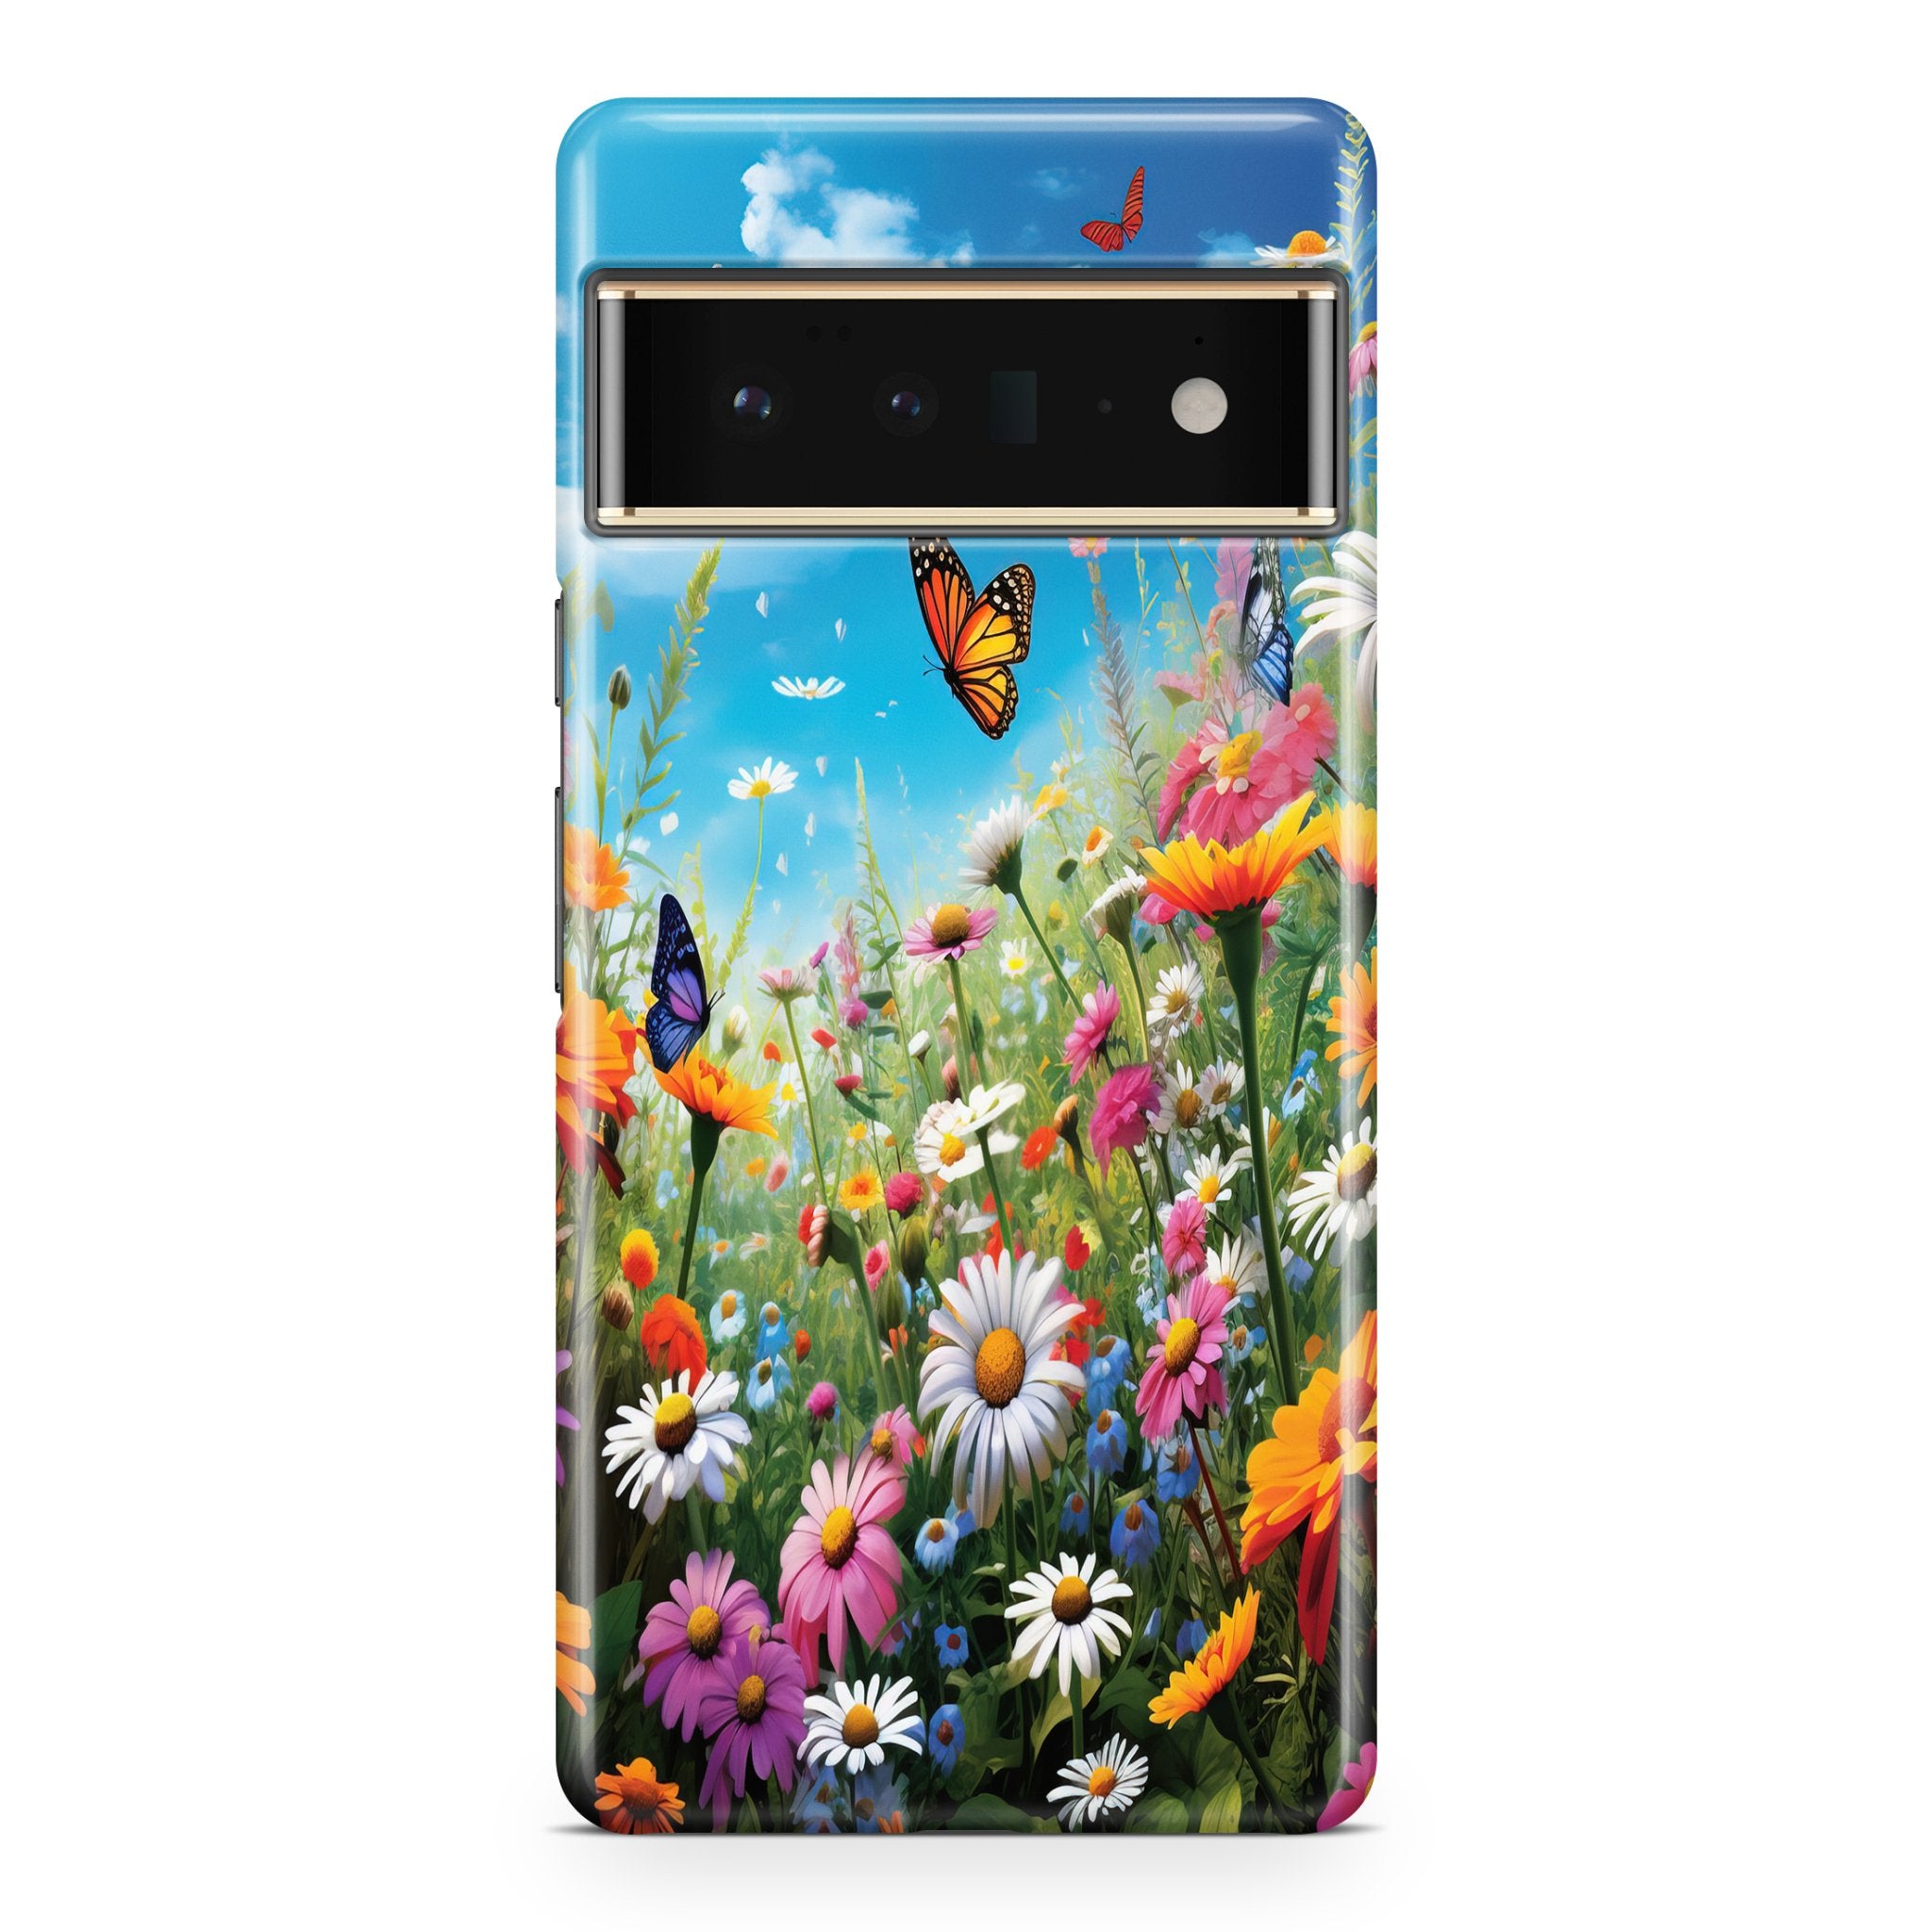 Beauty Embrace - Google phone case designs by CaseSwagger